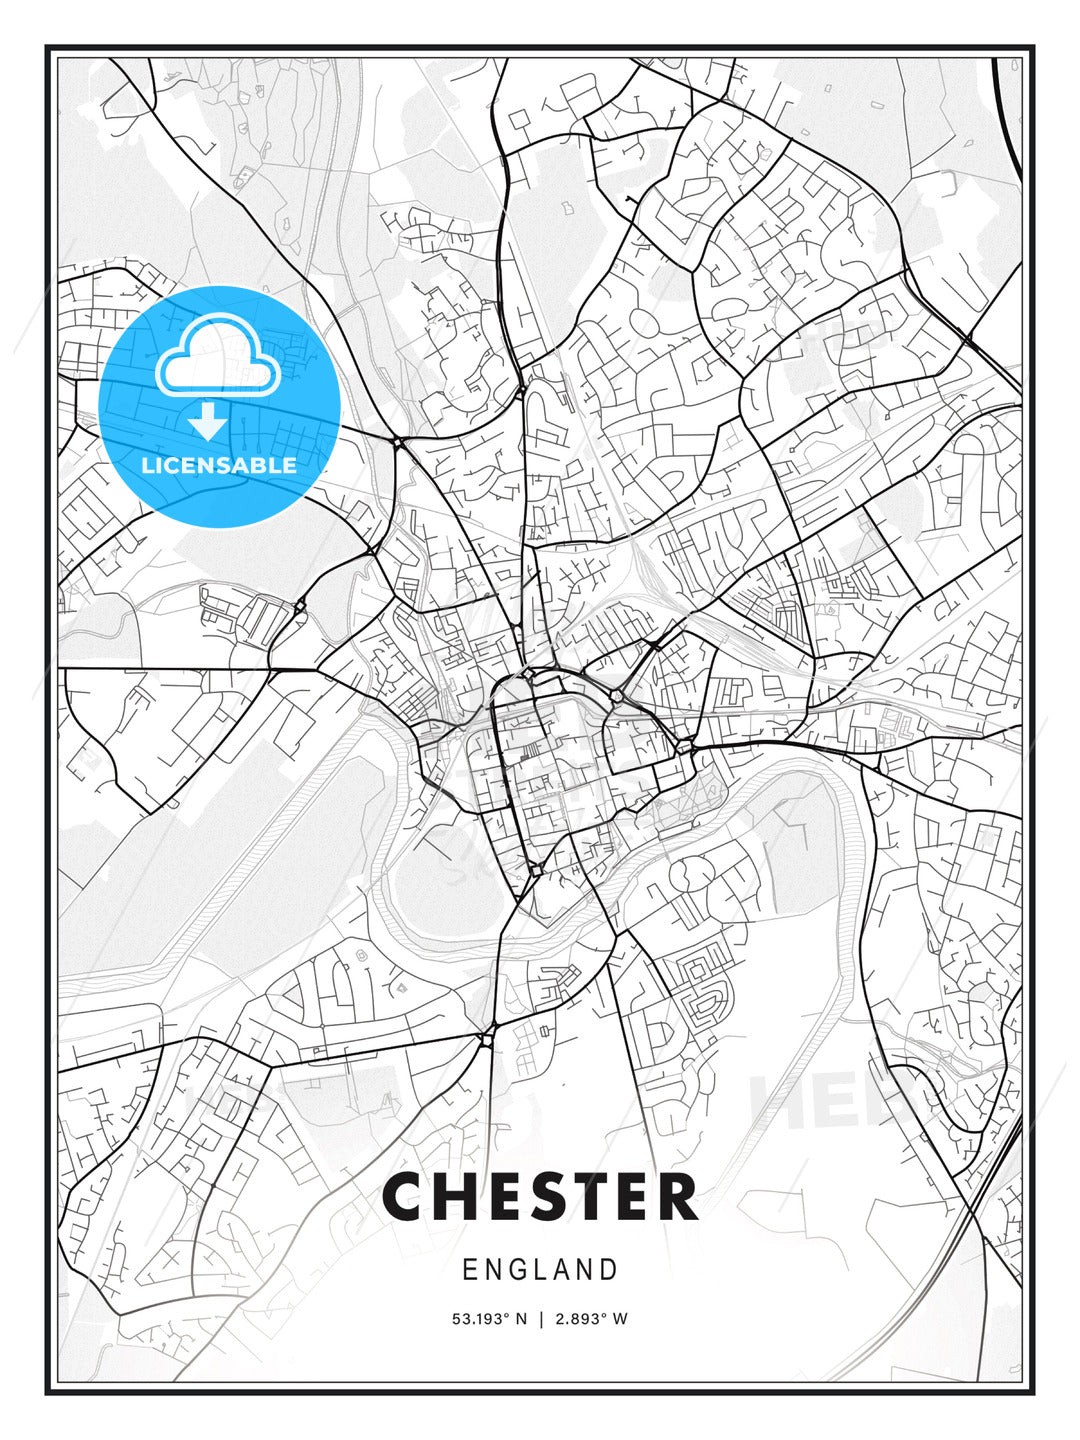 Chester, England, Modern Print Template in Various Formats - HEBSTREITS Sketches